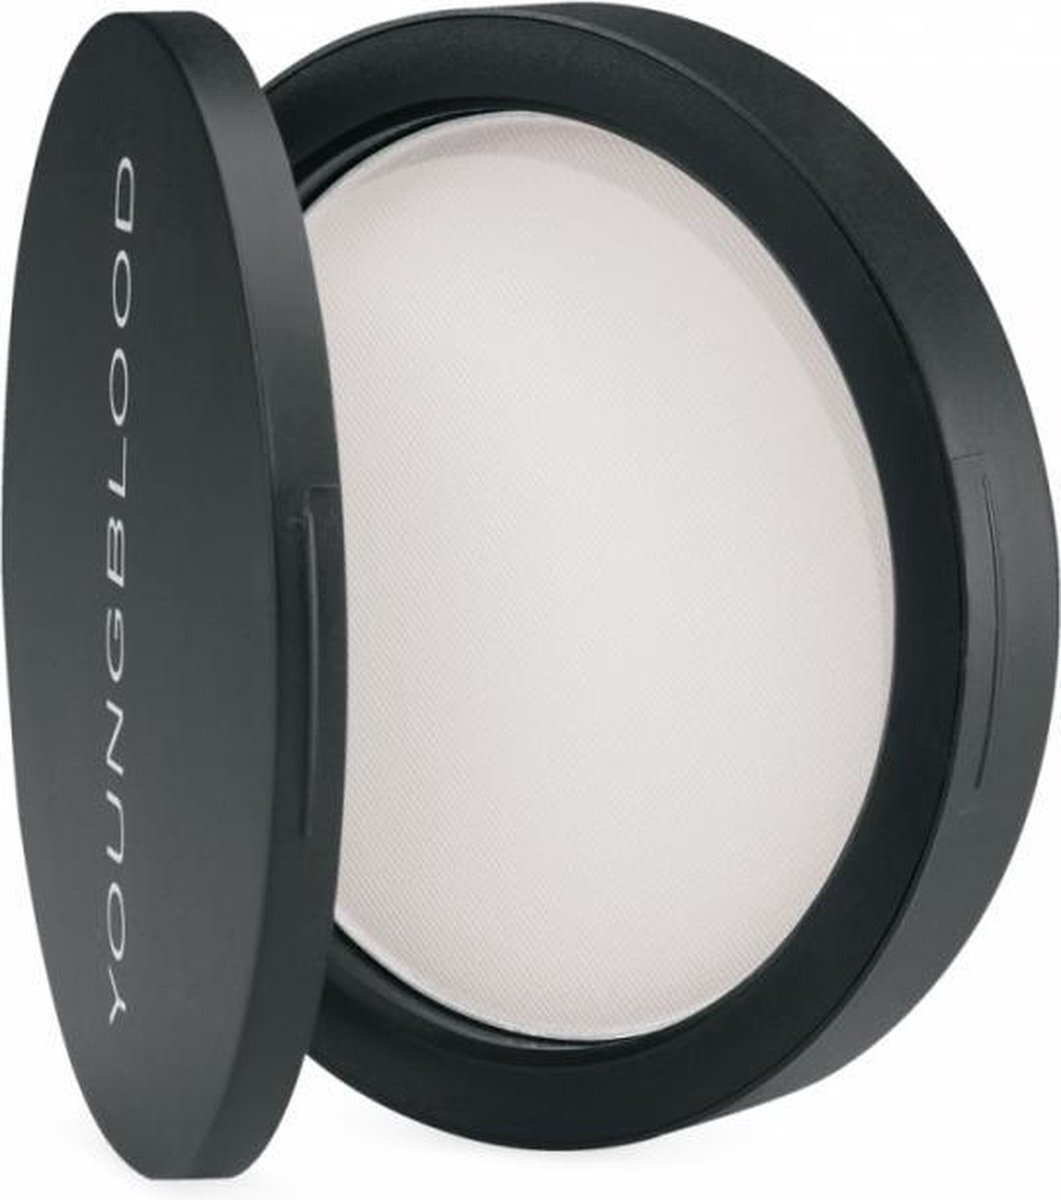 Youngblood - Pressed Mineral Rice Powder - Light